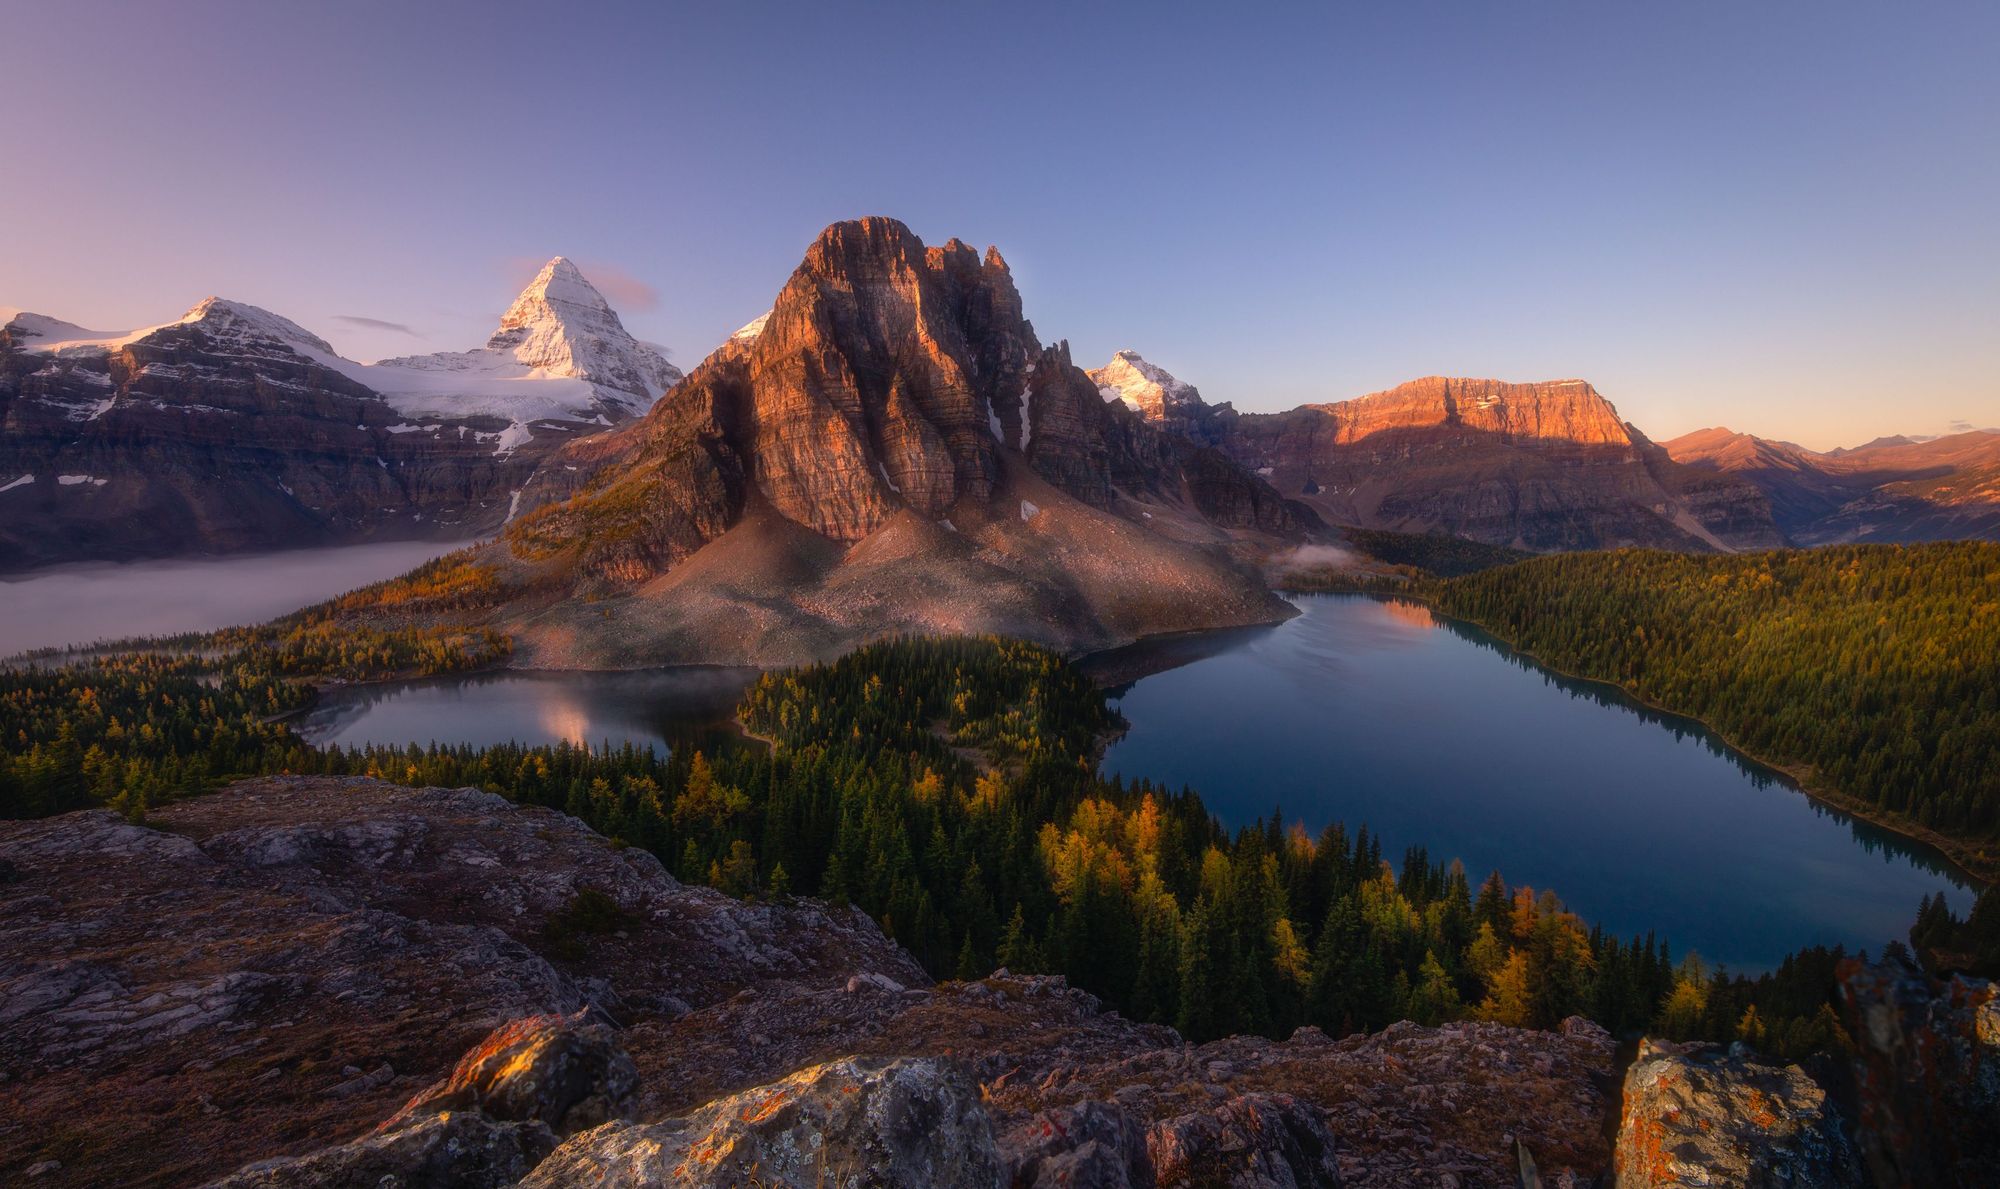 The landscape of Mount Assiniboine, the queen of Canadian Rockies, British Columbia, Canada, viewed from Nub peak. Photo: Getty